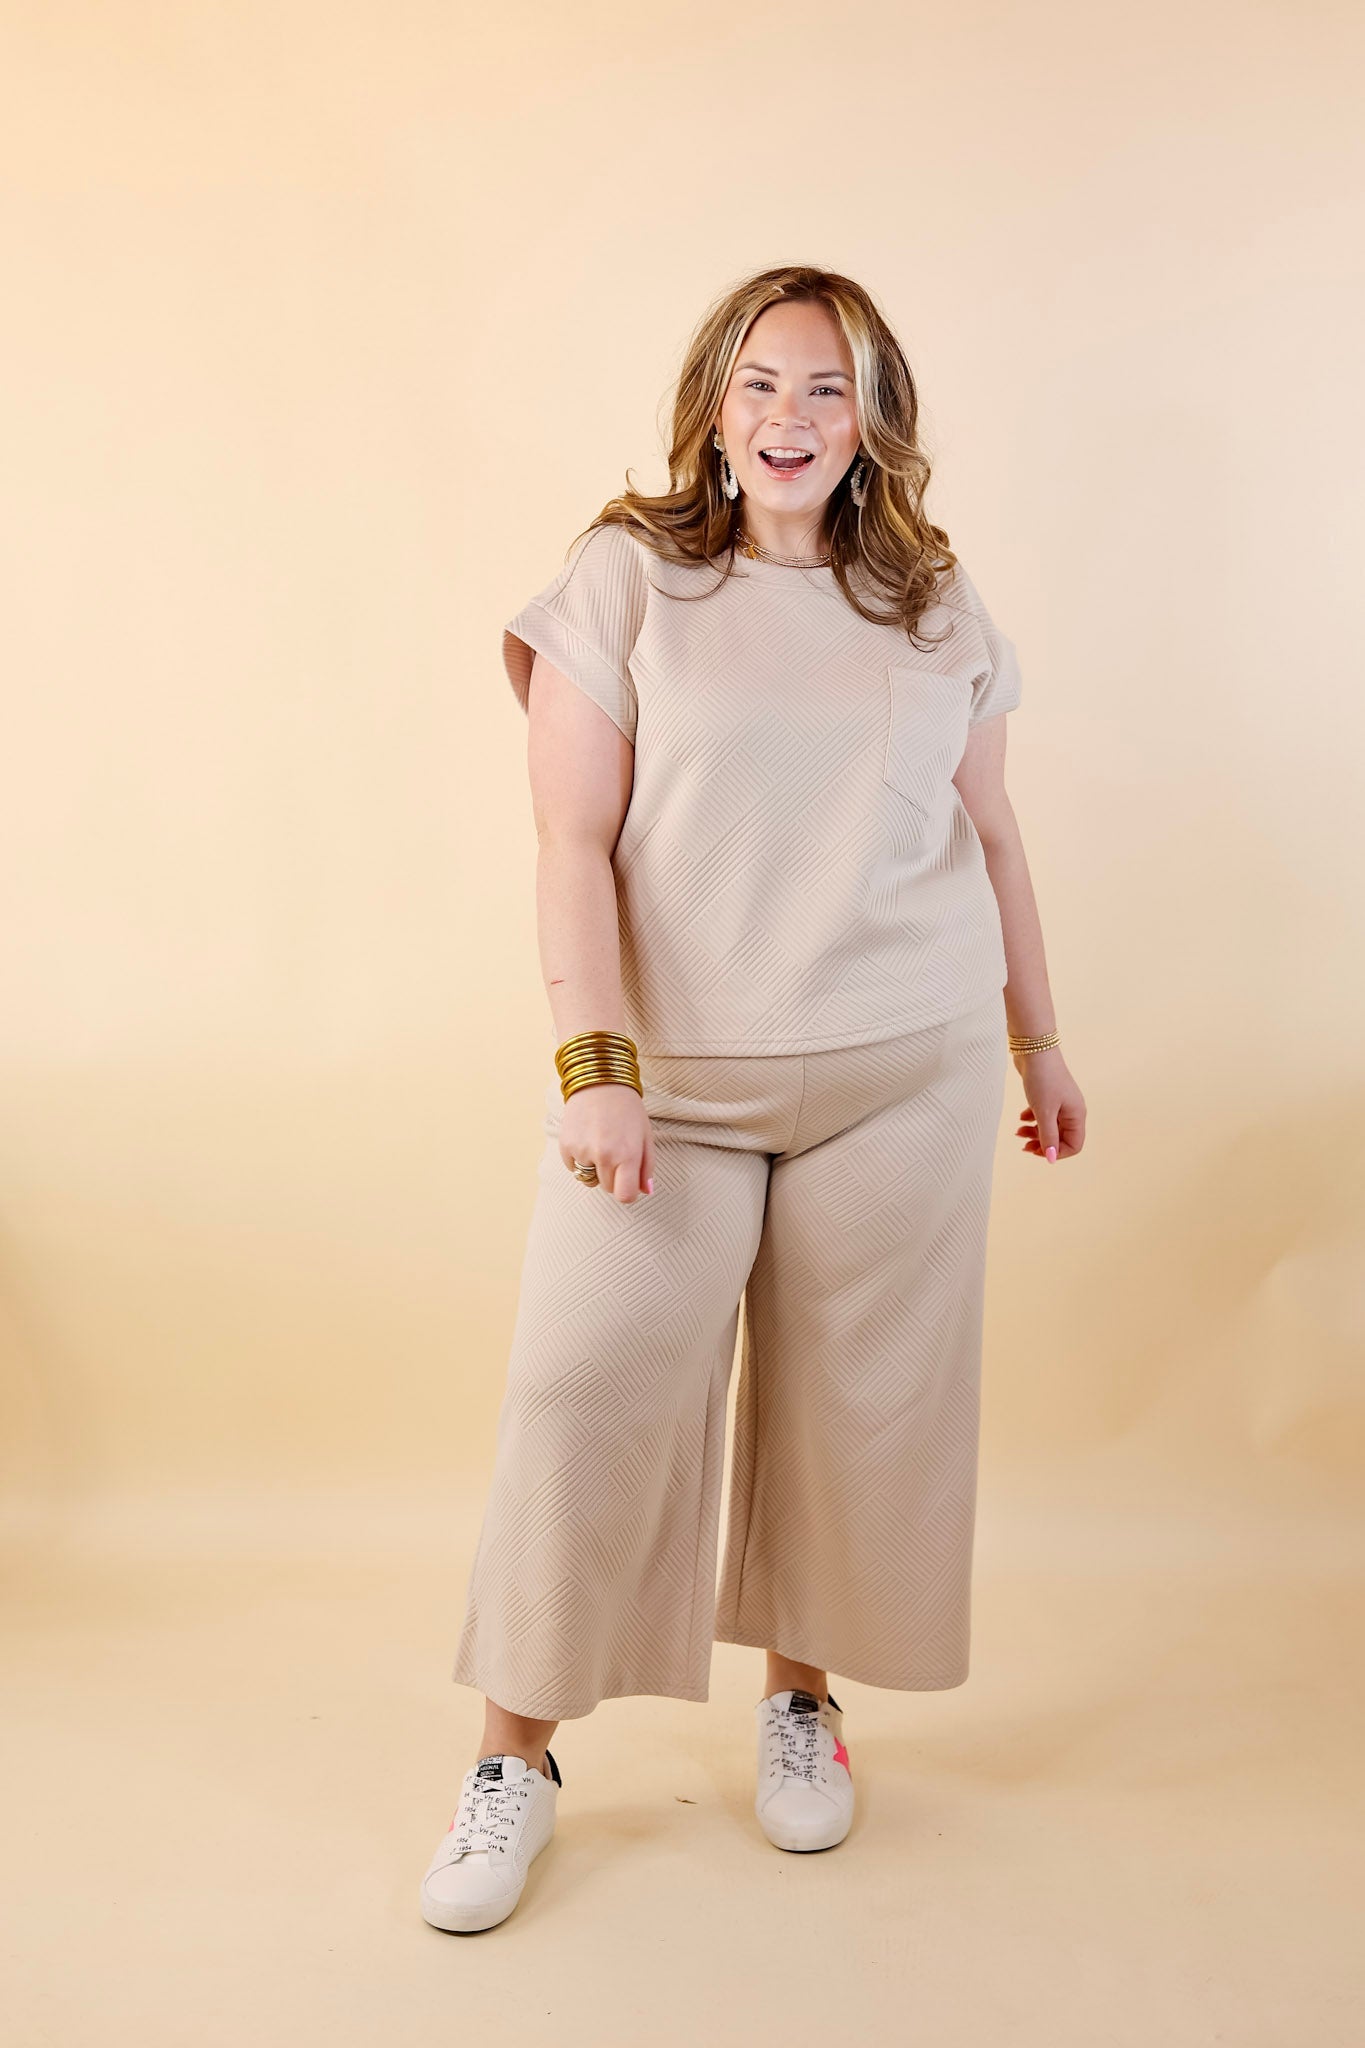 Glamour on the Go Textured Top with Pocket in Cream - Giddy Up Glamour Boutique